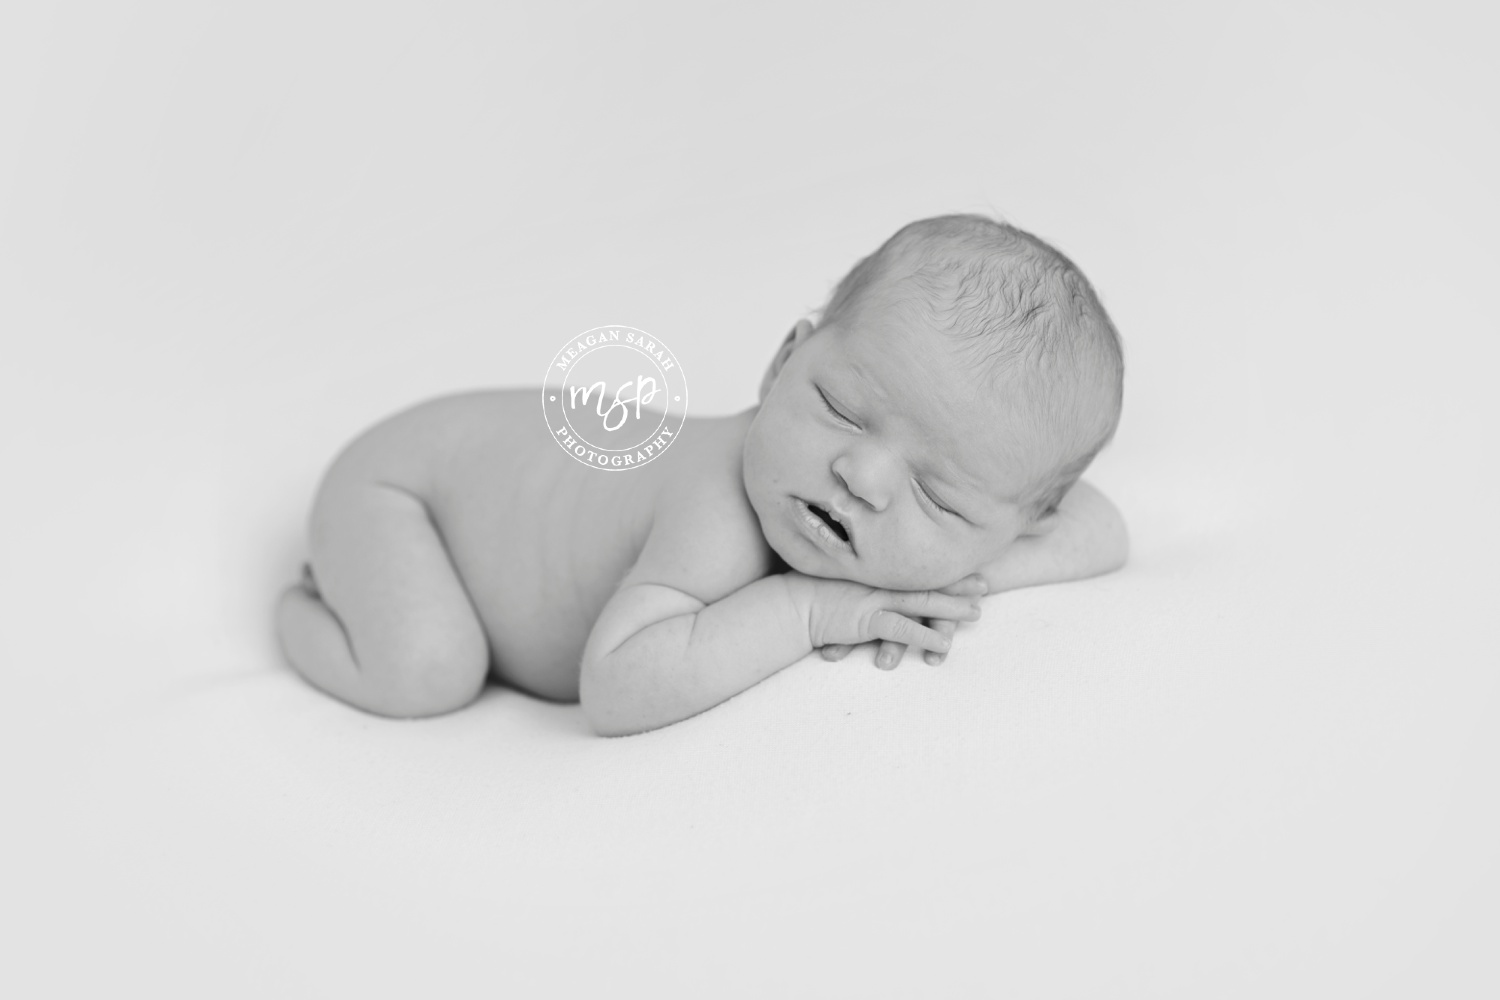 Black and White,PHOTOGRAPHER,Katie Louise Williams,Meagan Sarah Pope,West Yorkshire Photographer,Professional Photographer in Leeds,Meagan Sarah Photography,Leeds Photographer,Horsforth Photographer,Horsforth Leeds Photographer,Sex of Baby,Girl,Horsforth Newborn Photography,Leeds Baby Photographer,Leeds Newborn Photographer,Newborn Babies,Newborn Photographer,Newborn Photography,Photos of Babies,Photos of Newborns,Yorkshire Newborn Photographer,Yorkshire Newborn Photography,Front,